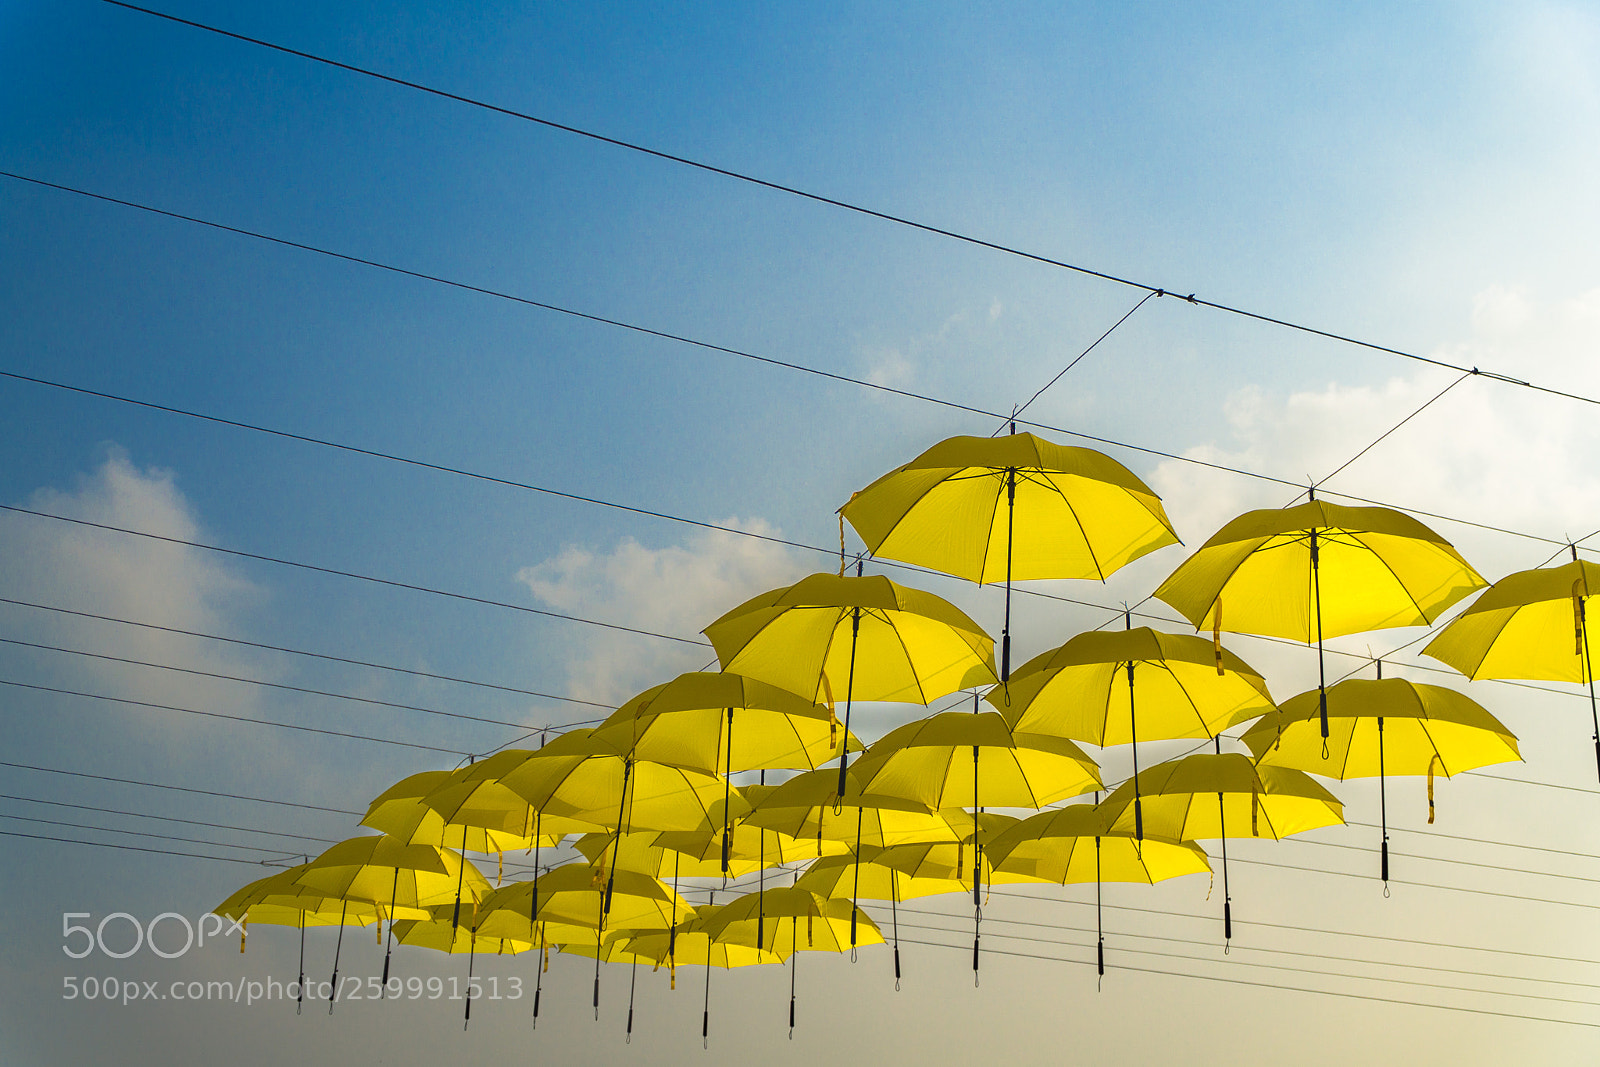 Sony a6000 sample photo. The yellow umbrellas photography